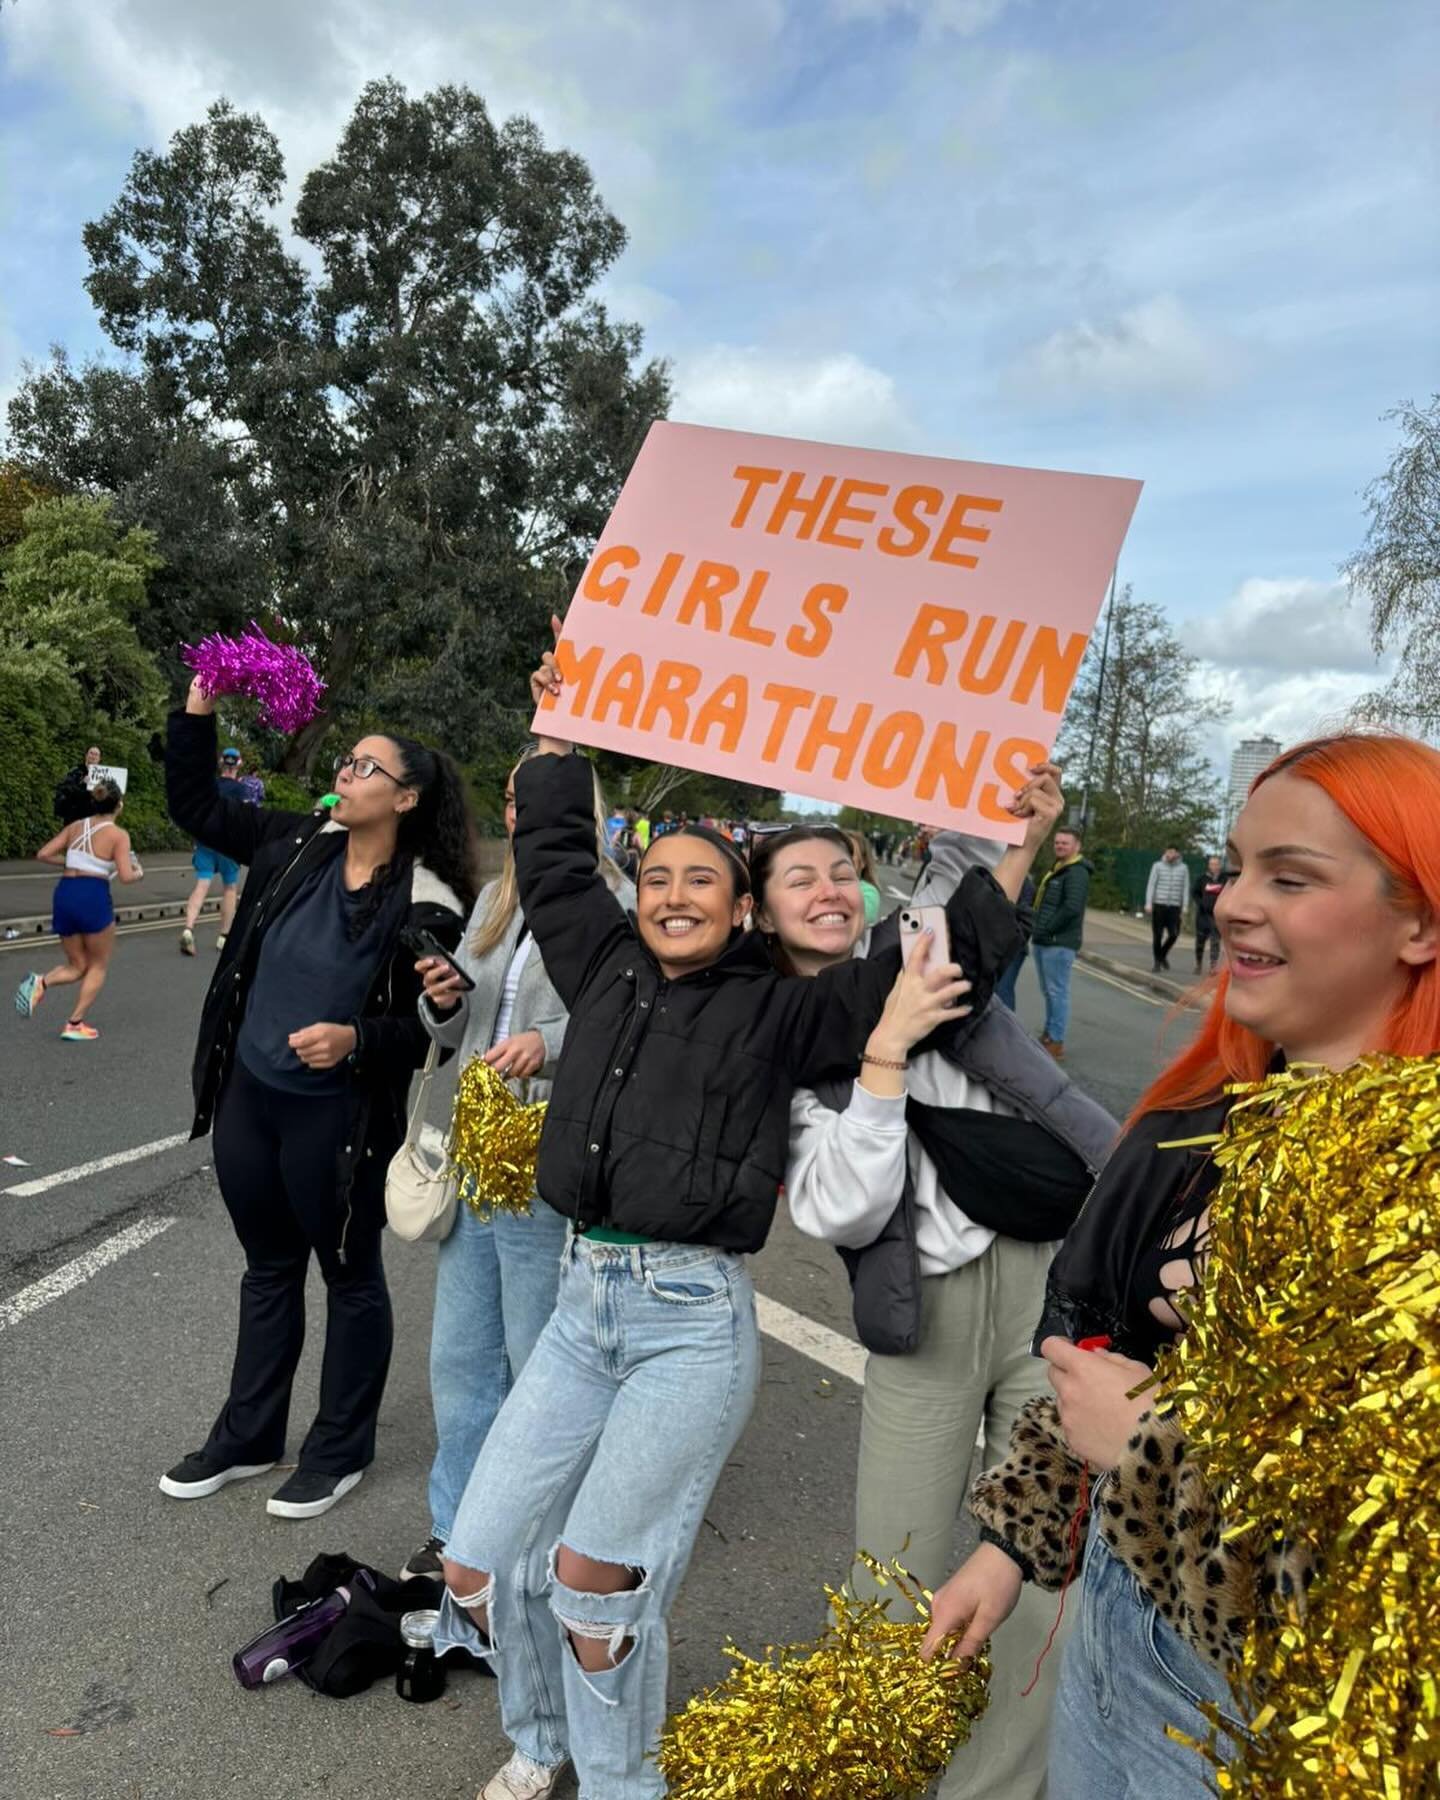 So bloody proud of each and every one of our Ambassadors and TGR girls for the Manchester marathon today 🥹🥹🩷🩷

Our Ambassador group chats have honestly made me tear up just seeing how much love and support these girls have for each other!!! And y